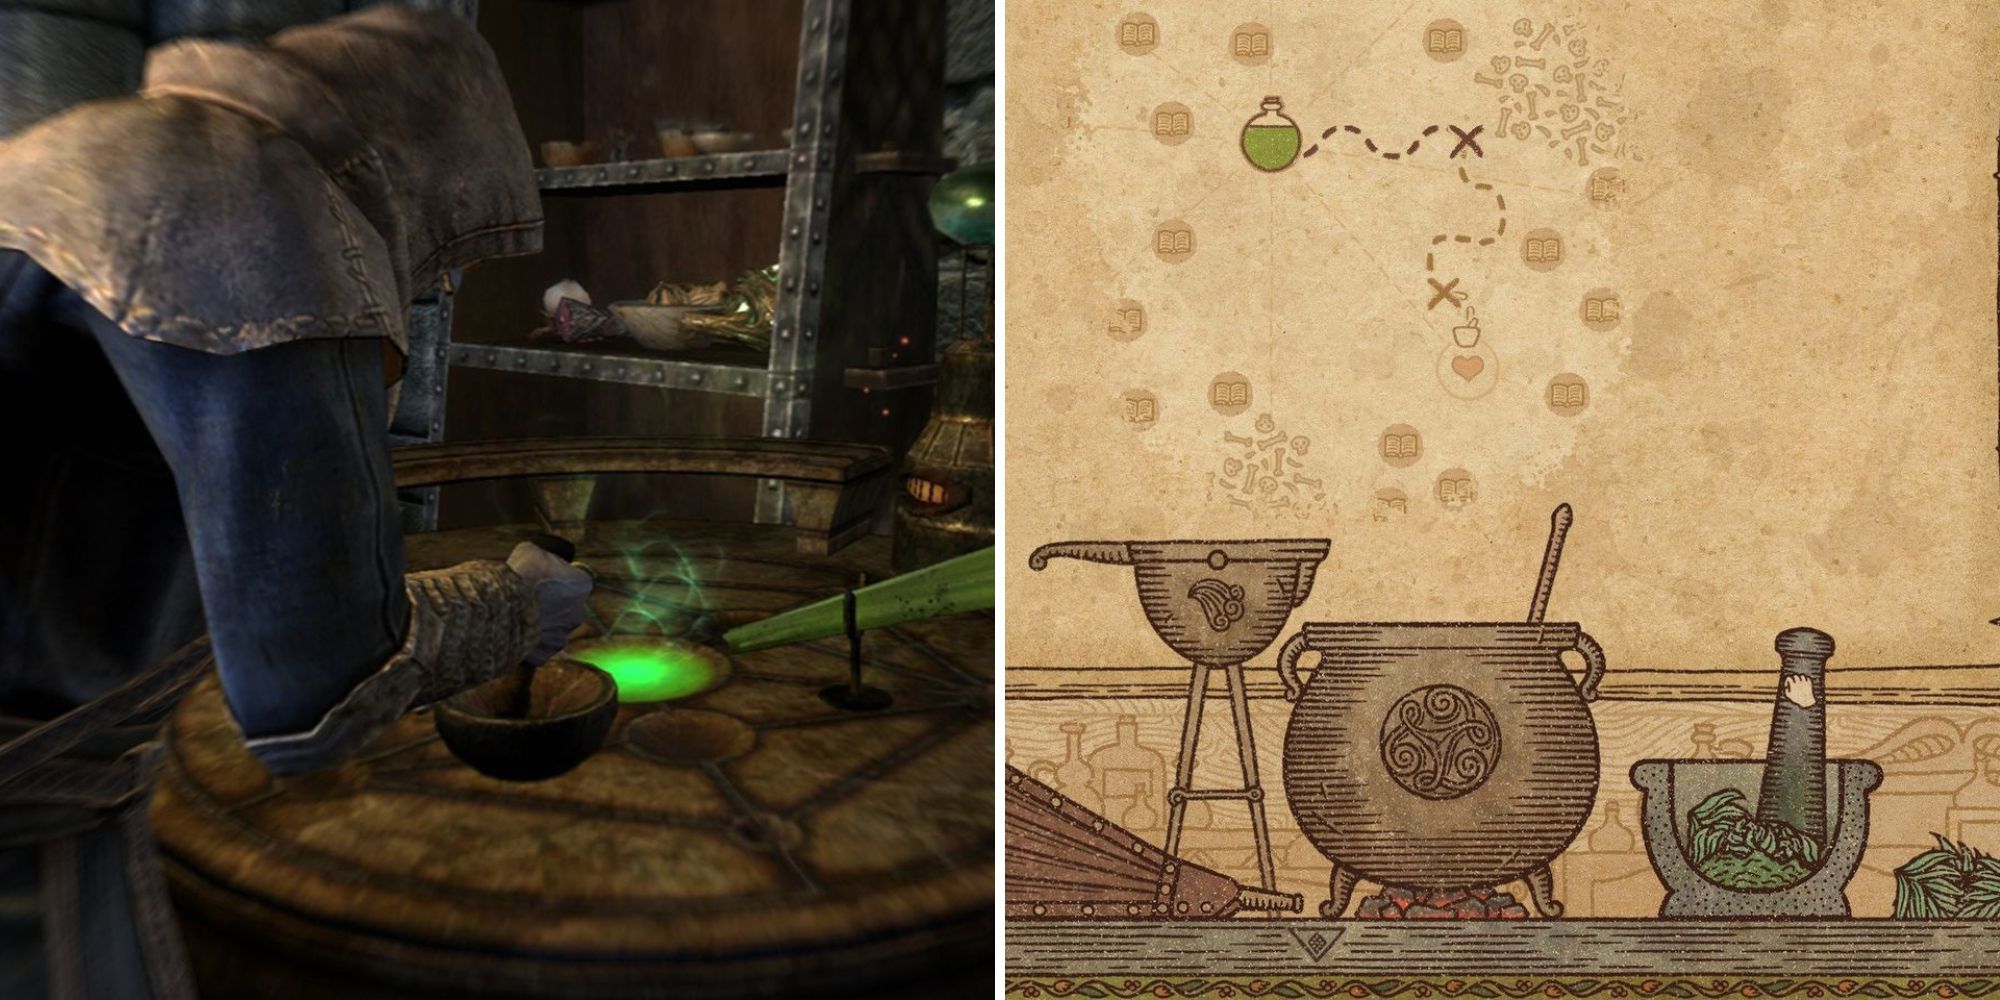 On the left is a mage grinding ingredients in Skyrim and on the right is someone grinding ingredients in Potion Craft